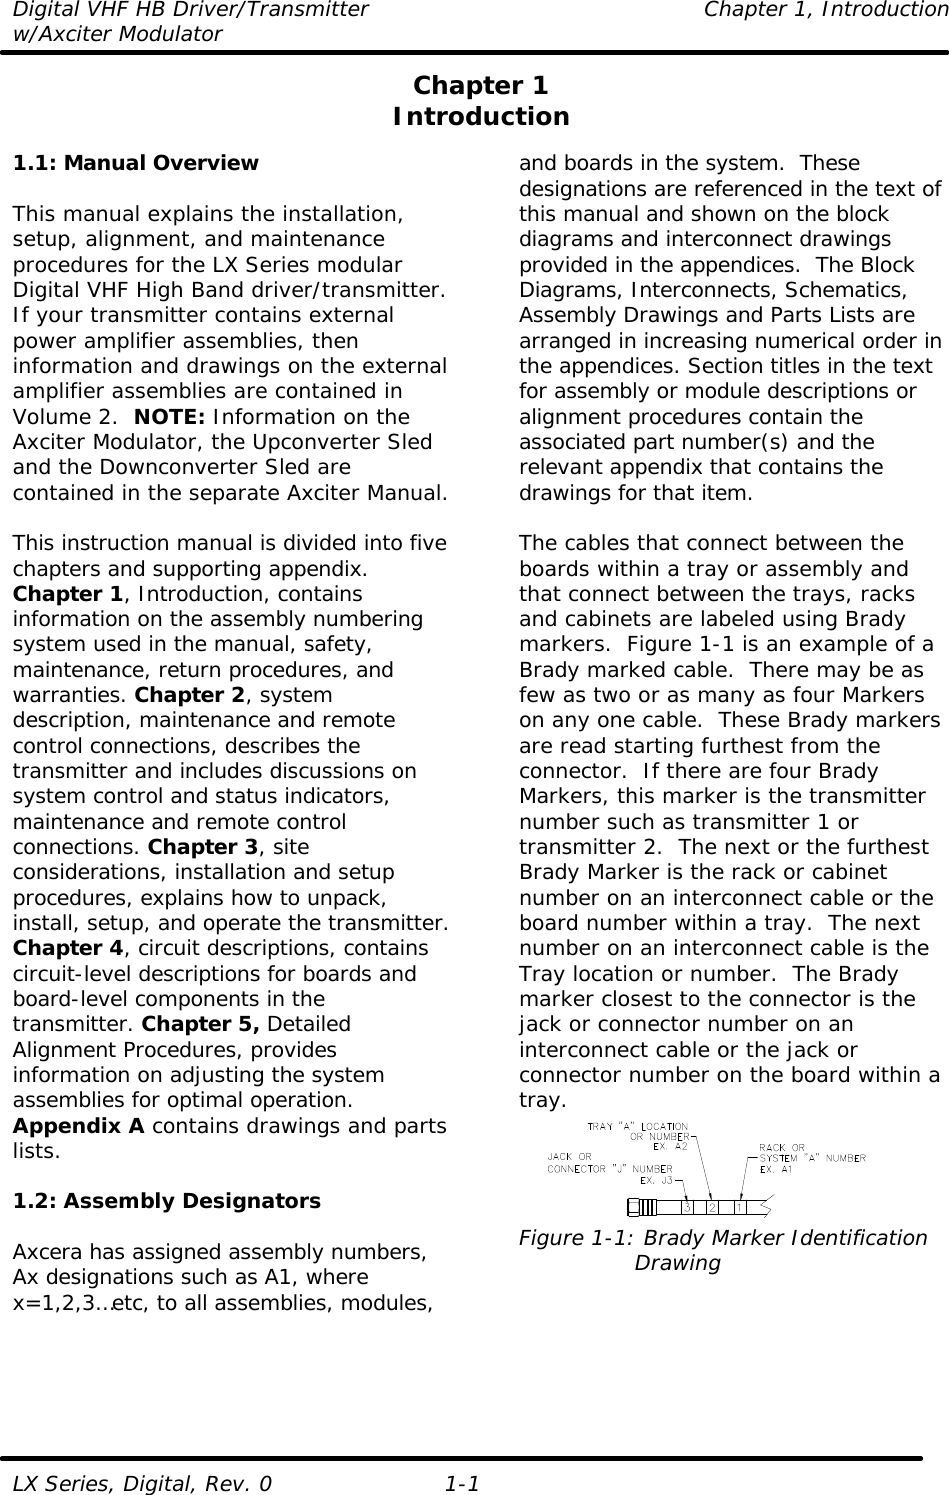 Digital VHF HB Driver/Transmitter    Chapter 1, Introduction w/Axciter Modulator  LX Series, Digital, Rev. 0 1-1 Chapter 1 Introduction  1.1: Manual Overview  This manual explains the installation, setup, alignment, and maintenance procedures for the LX Series modular Digital VHF High Band driver/transmitter. If your transmitter contains external power amplifier assemblies, then information and drawings on the external amplifier assemblies are contained in Volume 2.  NOTE: Information on the Axciter Modulator, the Upconverter Sled and the Downconverter Sled are contained in the separate Axciter Manual.  This instruction manual is divided into five chapters and supporting appendix. Chapter 1, Introduction, contains information on the assembly numbering system used in the manual, safety, maintenance, return procedures, and warranties. Chapter 2, system description, maintenance and remote control connections, describes the transmitter and includes discussions on system control and status indicators, maintenance and remote control connections. Chapter 3, site considerations, installation and setup procedures, explains how to unpack, install, setup, and operate the transmitter. Chapter 4, circuit descriptions, contains circuit-level descriptions for boards and board-level components in the transmitter. Chapter 5, Detailed Alignment Procedures, provides information on adjusting the system assemblies for optimal operation. Appendix A contains drawings and parts lists.  1.2: Assembly Designators  Axcera has assigned assembly numbers, Ax designations such as A1, where x=1,2,3…etc, to all assemblies, modules, and boards in the system.  These designations are referenced in the text of this manual and shown on the block diagrams and interconnect drawings provided in the appendices.  The Block Diagrams, Interconnects, Schematics, Assembly Drawings and Parts Lists are arranged in increasing numerical order in the appendices. Section titles in the text for assembly or module descriptions or alignment procedures contain the associated part number(s) and the relevant appendix that contains the drawings for that item.   The cables that connect between the boards within a tray or assembly and that connect between the trays, racks and cabinets are labeled using Brady markers.  Figure 1-1 is an example of a Brady marked cable.  There may be as few as two or as many as four Markers on any one cable.  These Brady markers are read starting furthest from the connector.  If there are four Brady Markers, this marker is the transmitter number such as transmitter 1 or transmitter 2.  The next or the furthest Brady Marker is the rack or cabinet number on an interconnect cable or the board number within a tray.  The next number on an interconnect cable is the Tray location or number.  The Brady marker closest to the connector is the jack or connector number on an interconnect cable or the jack or connector number on the board within a tray.  Figure 1-1: Brady Marker Identification                 Drawing    